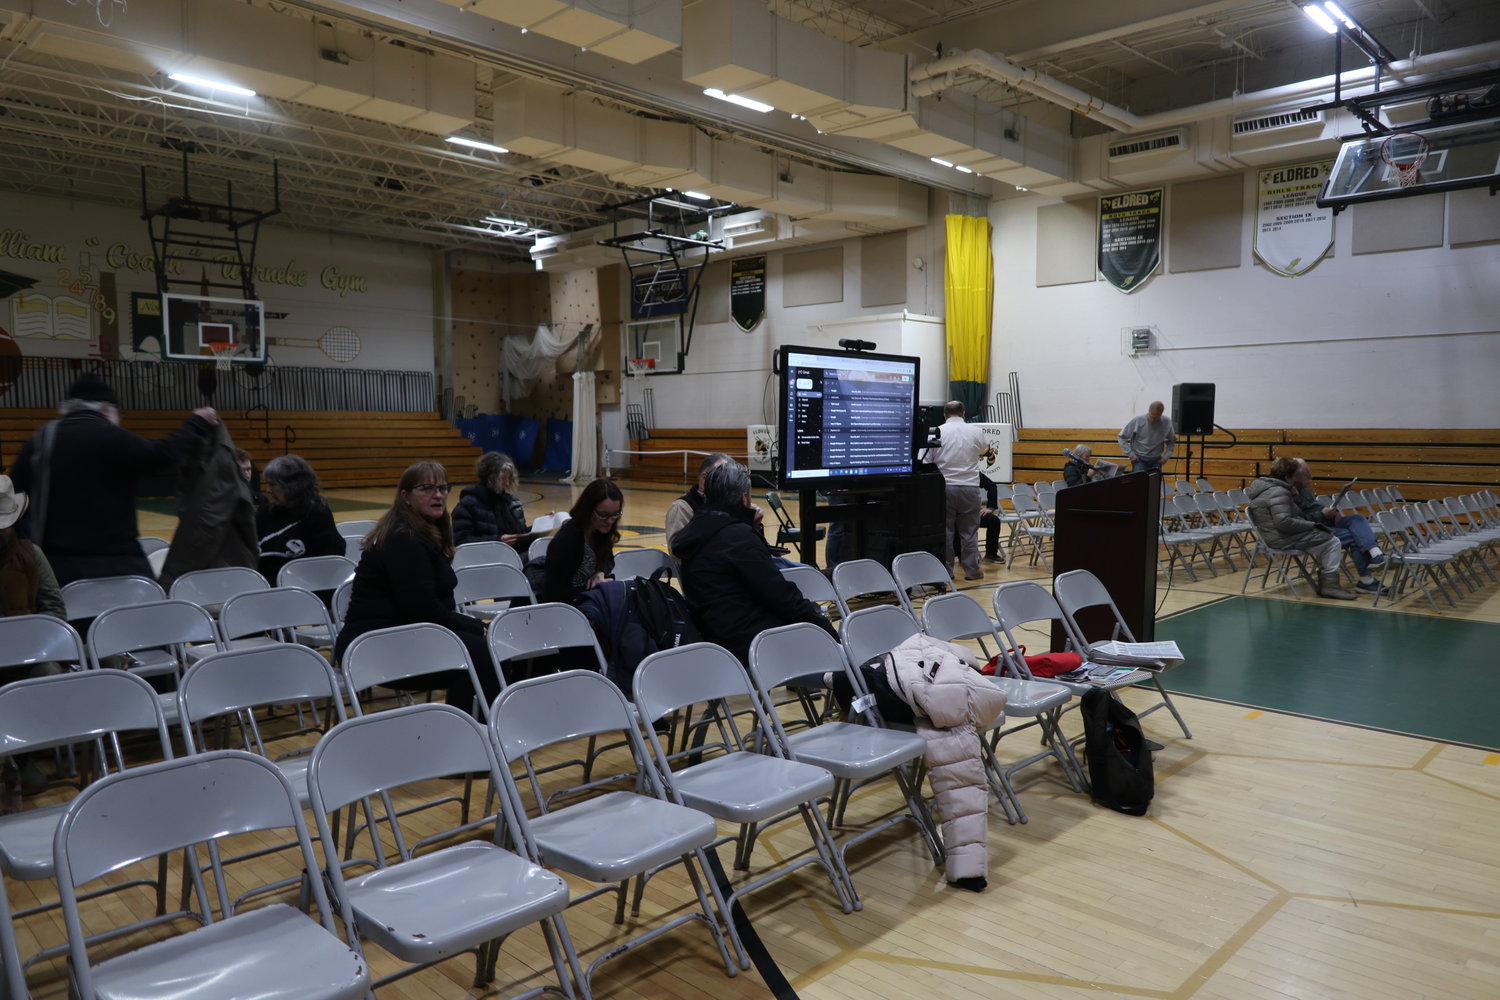 A sparce crowd was at the Eldred High School gym at the January 26 Highland Planning Board meeting. The meeting was rescheduled from January 25 due to inclement weather.